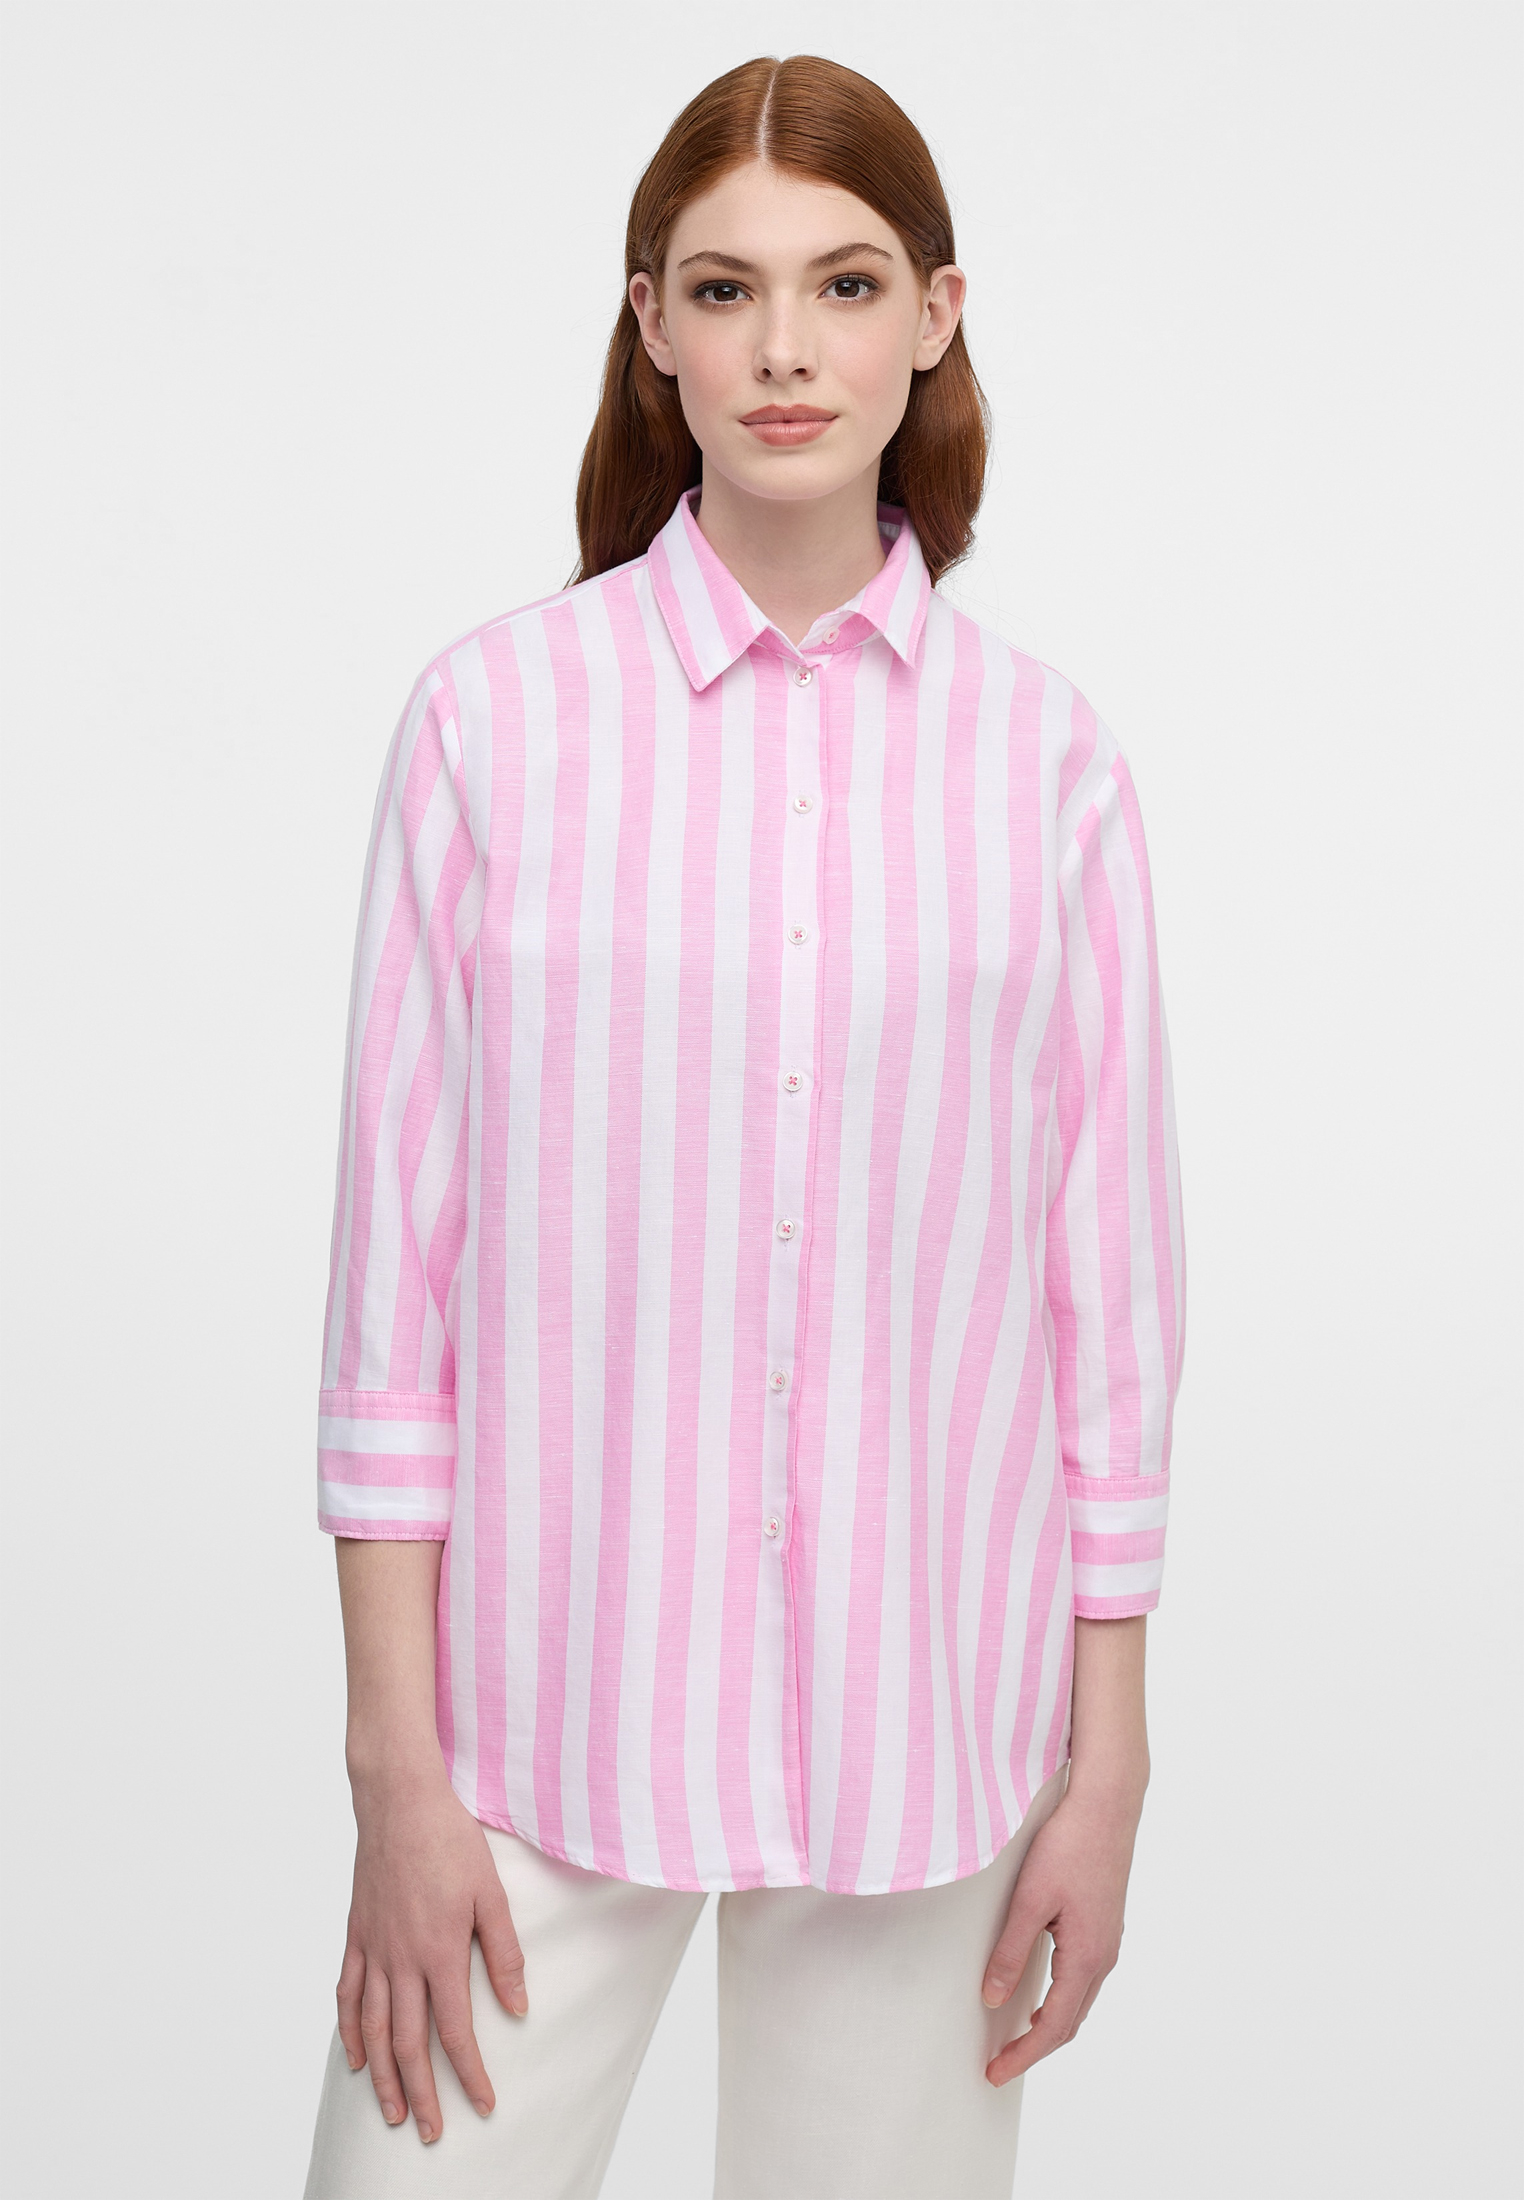 shirt-blouse in rose striped | 3/4 2BL03967-15-11-36-3/4 | 36 rose | sleeves 